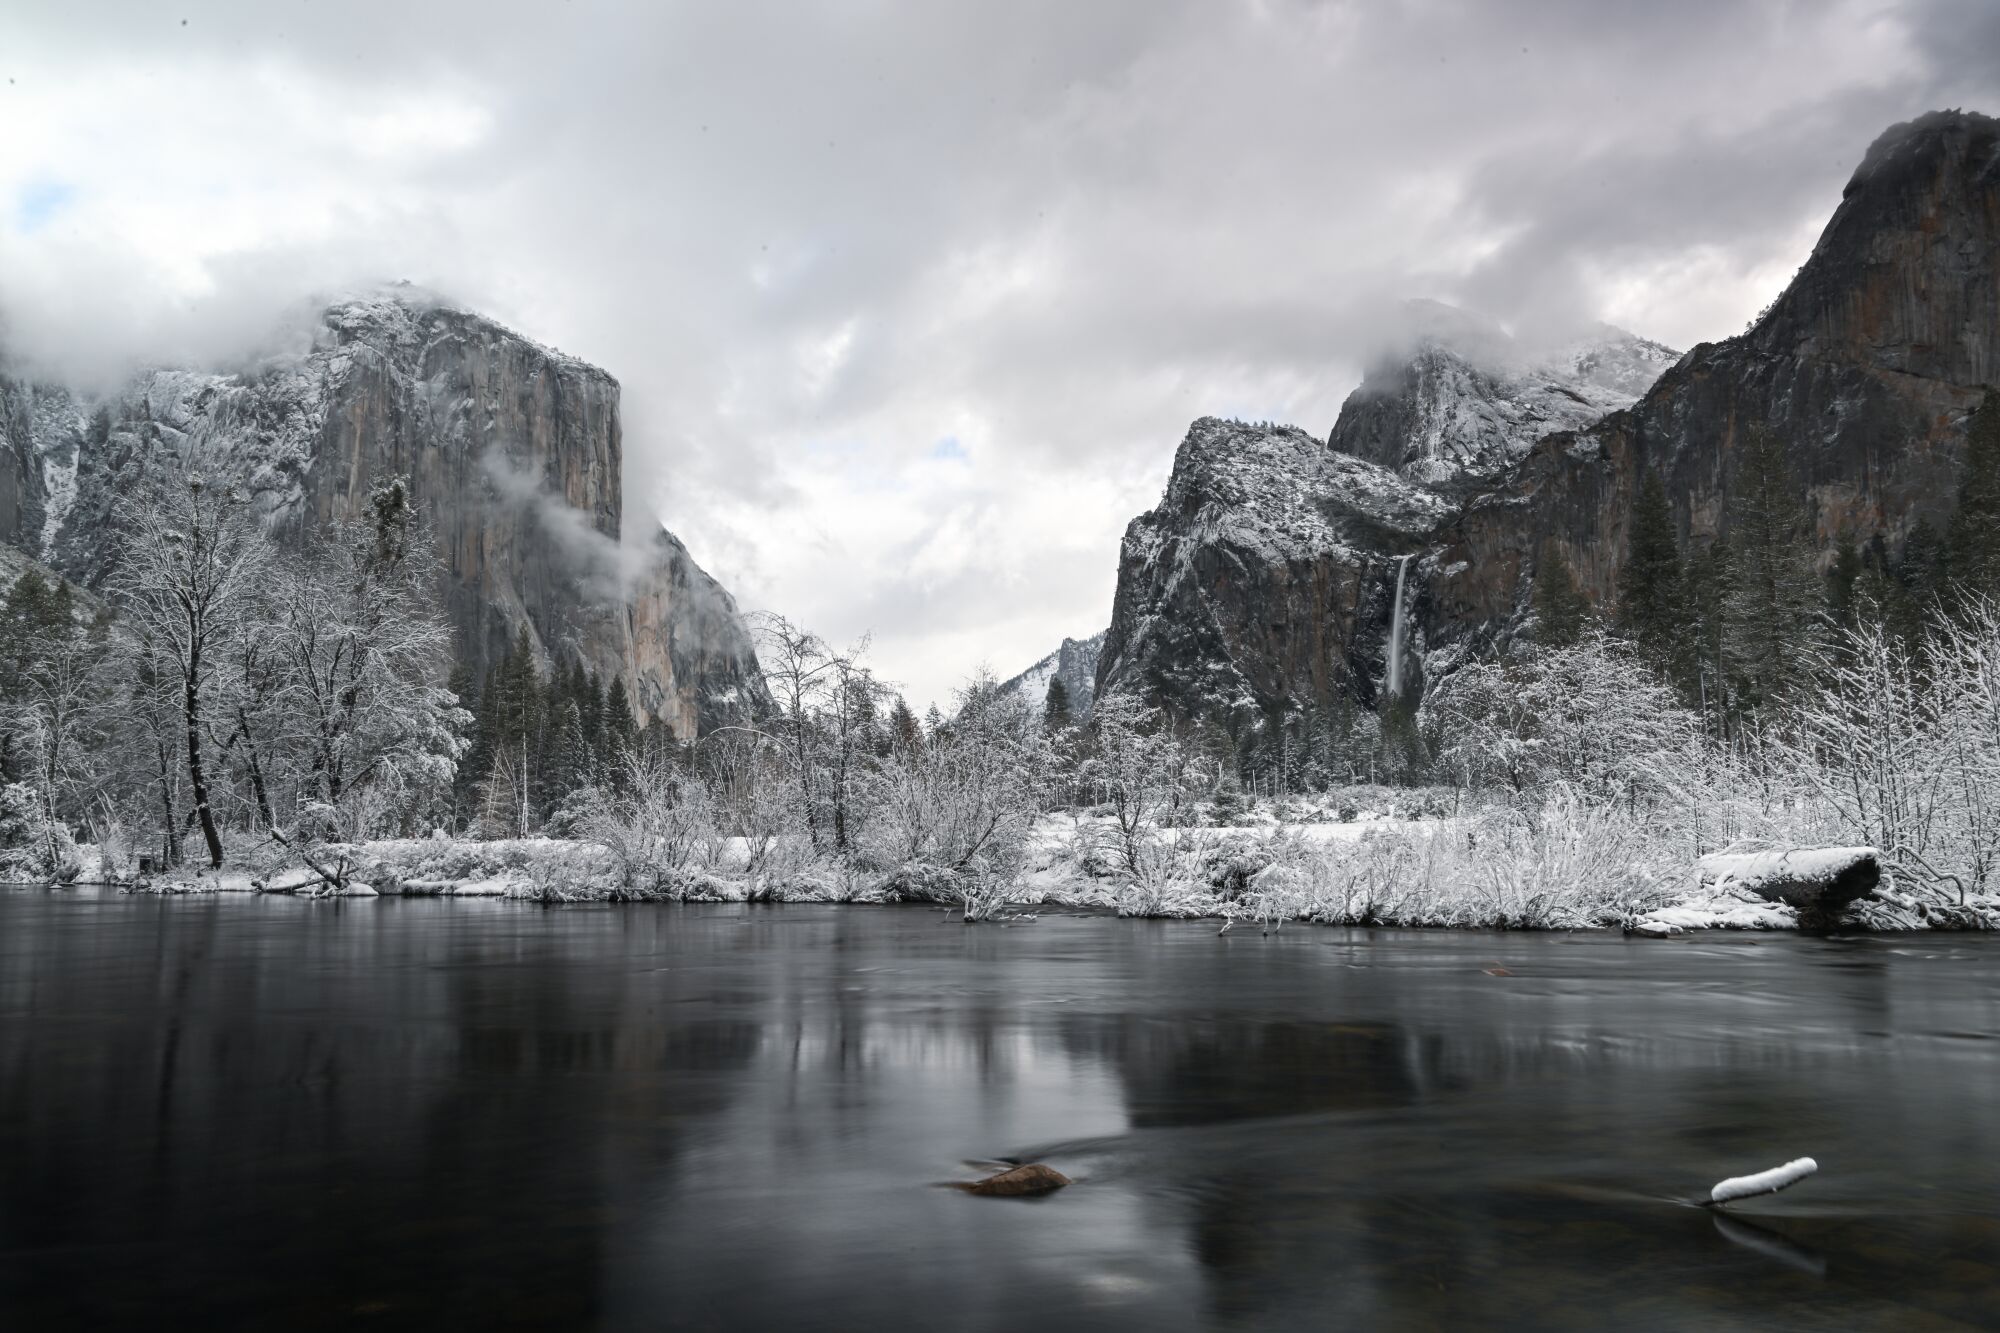 A scenic view from the Valley View point as snow blanked Yosemite National Park.